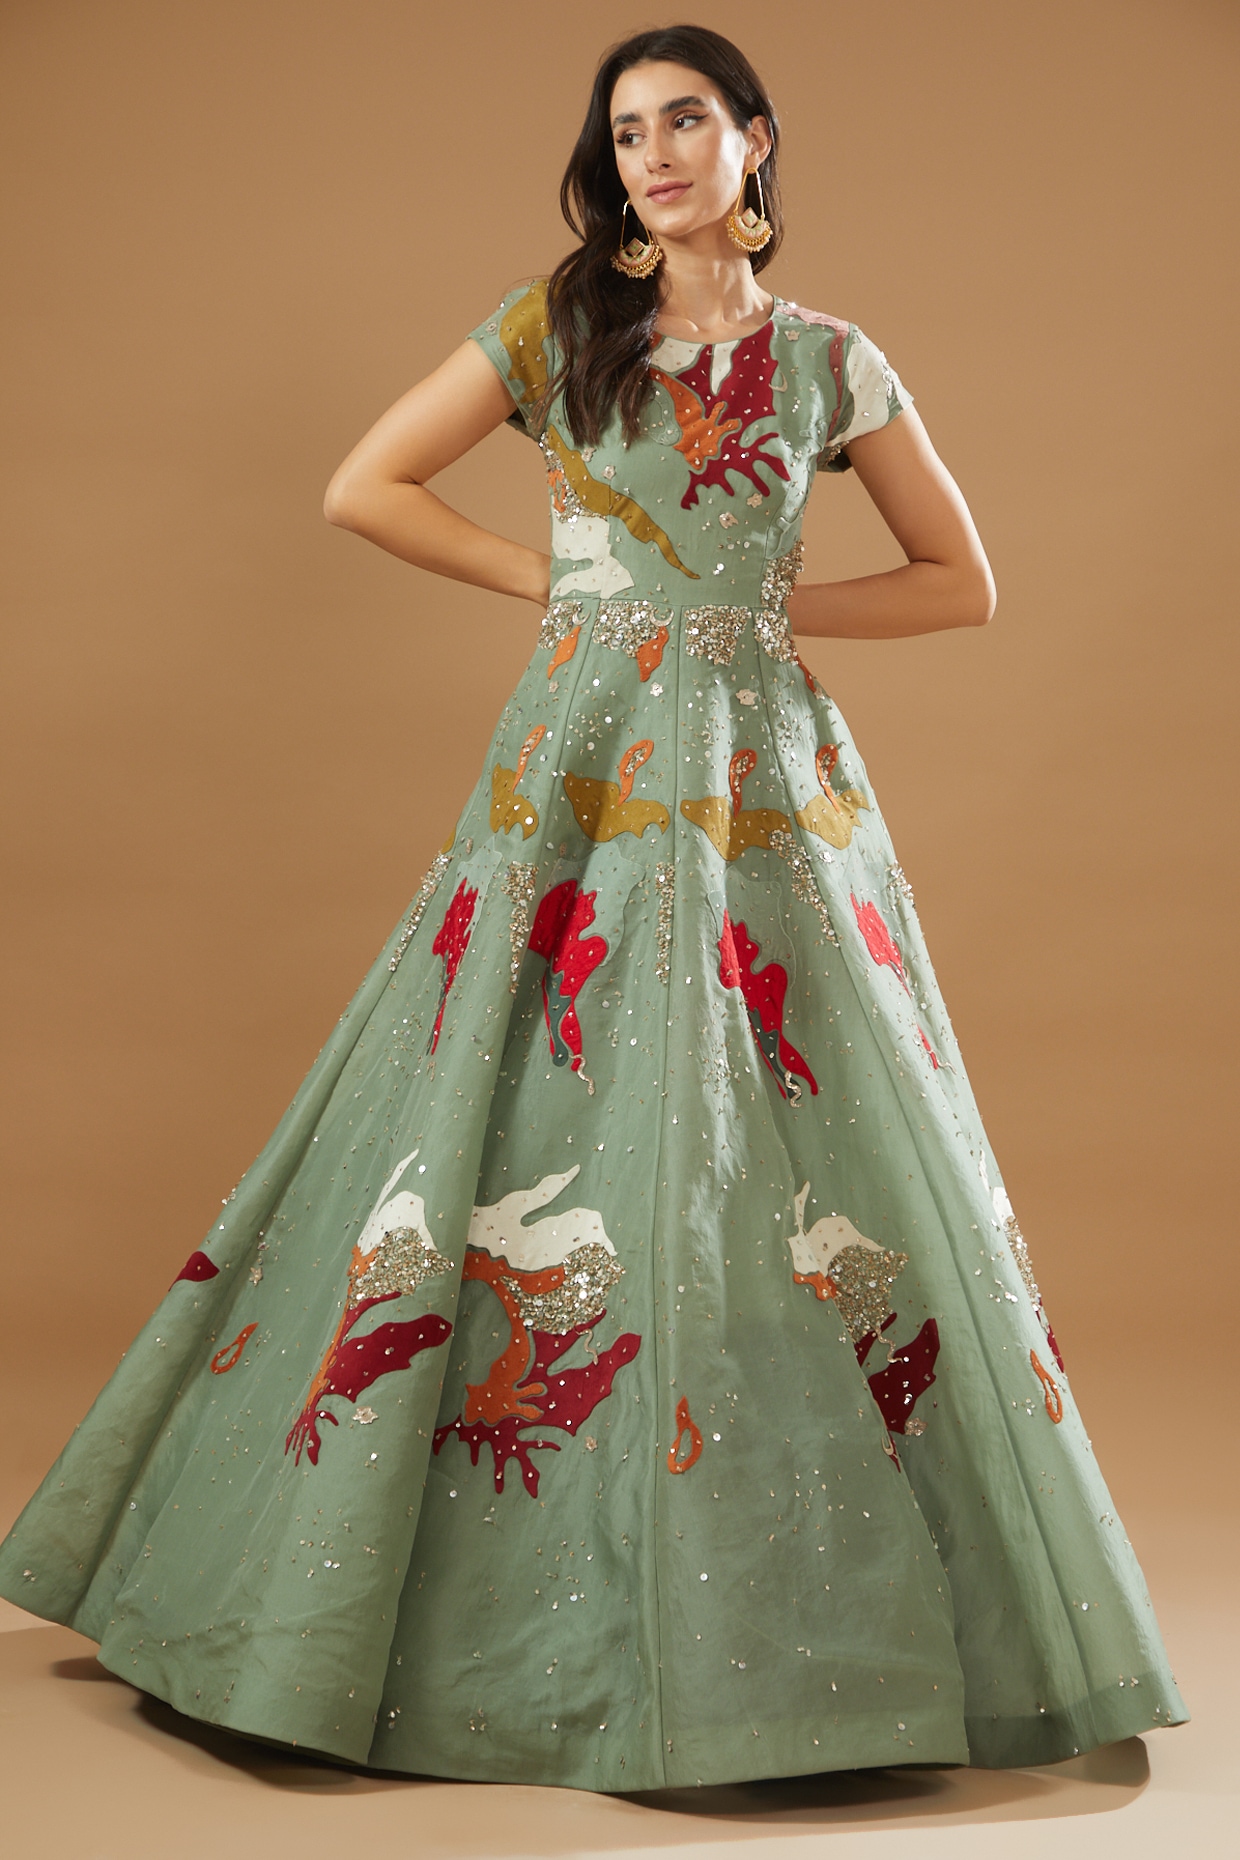 Beautiful Silk Gown with superb embroidery embellishments and detailing. |  Fancy dress design, Blouse design models, Fashion dresses